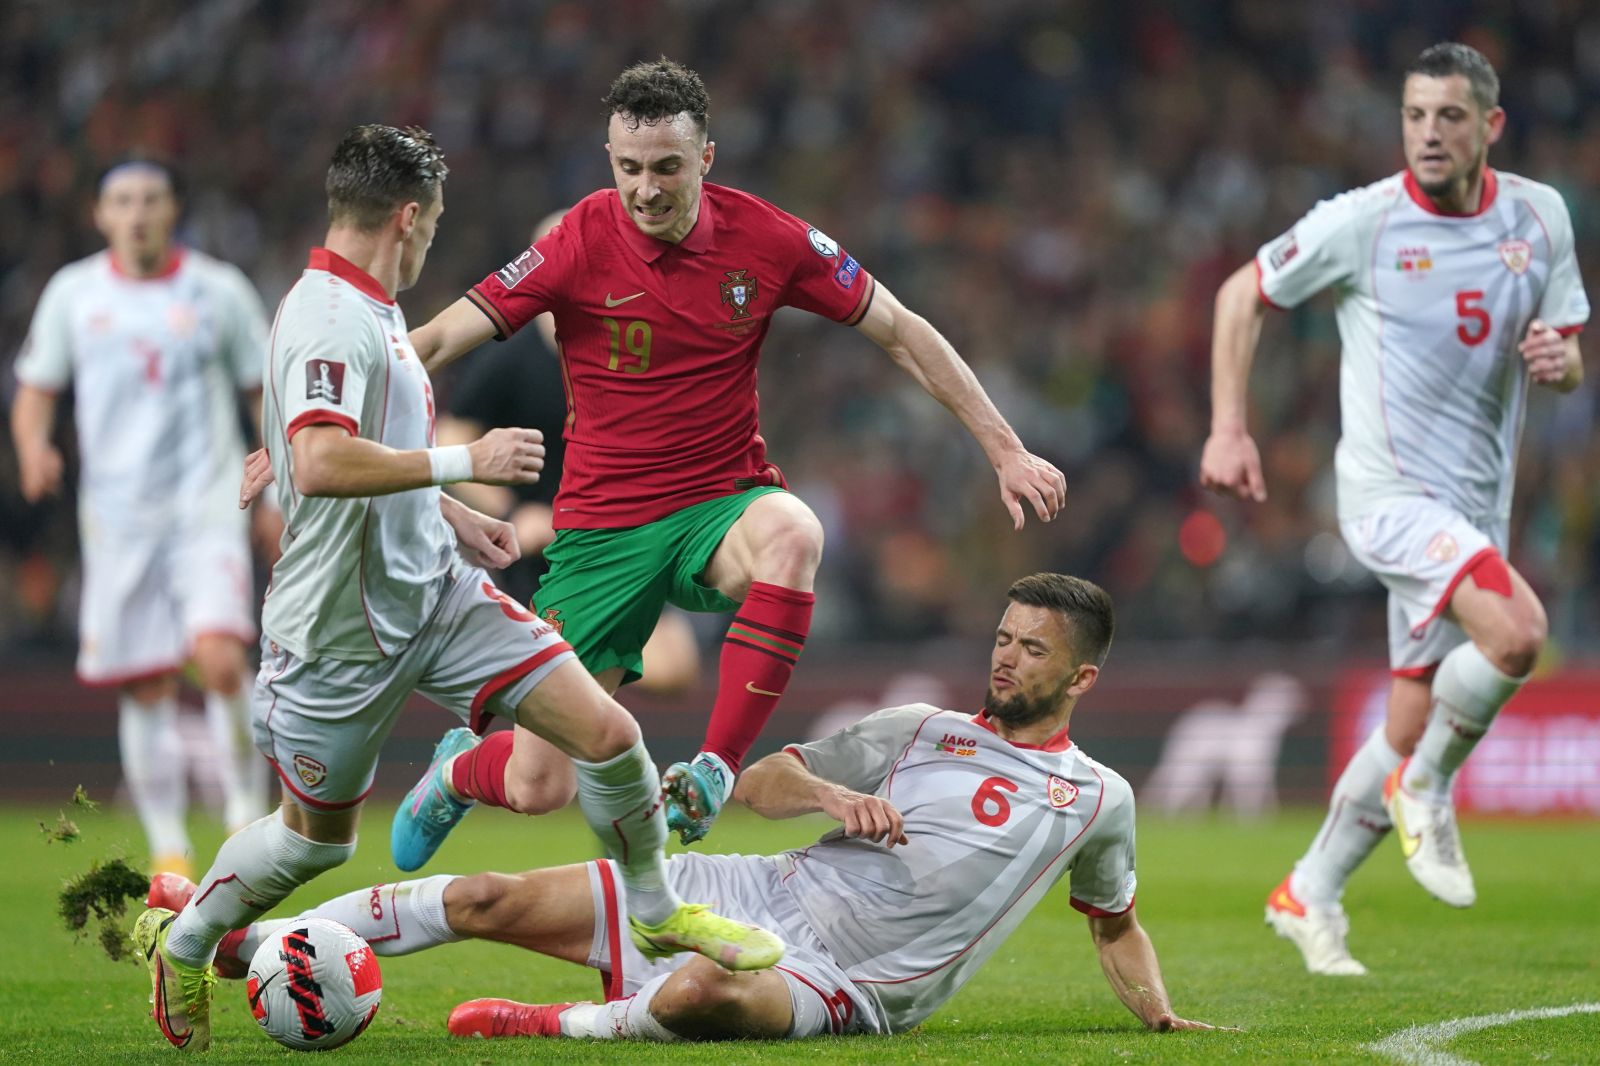 epa09859258 Portugal player Diogo Jota (C) in action against North Macedonia player Visar Musliu during the FIFA World Cup Qatar 2022 play-off qualifying soccer match Portugal vs North Macedonia held on Dragao stadium in Porto, Portugal, 29 March 2022.  EPA/HUGO DELGADO